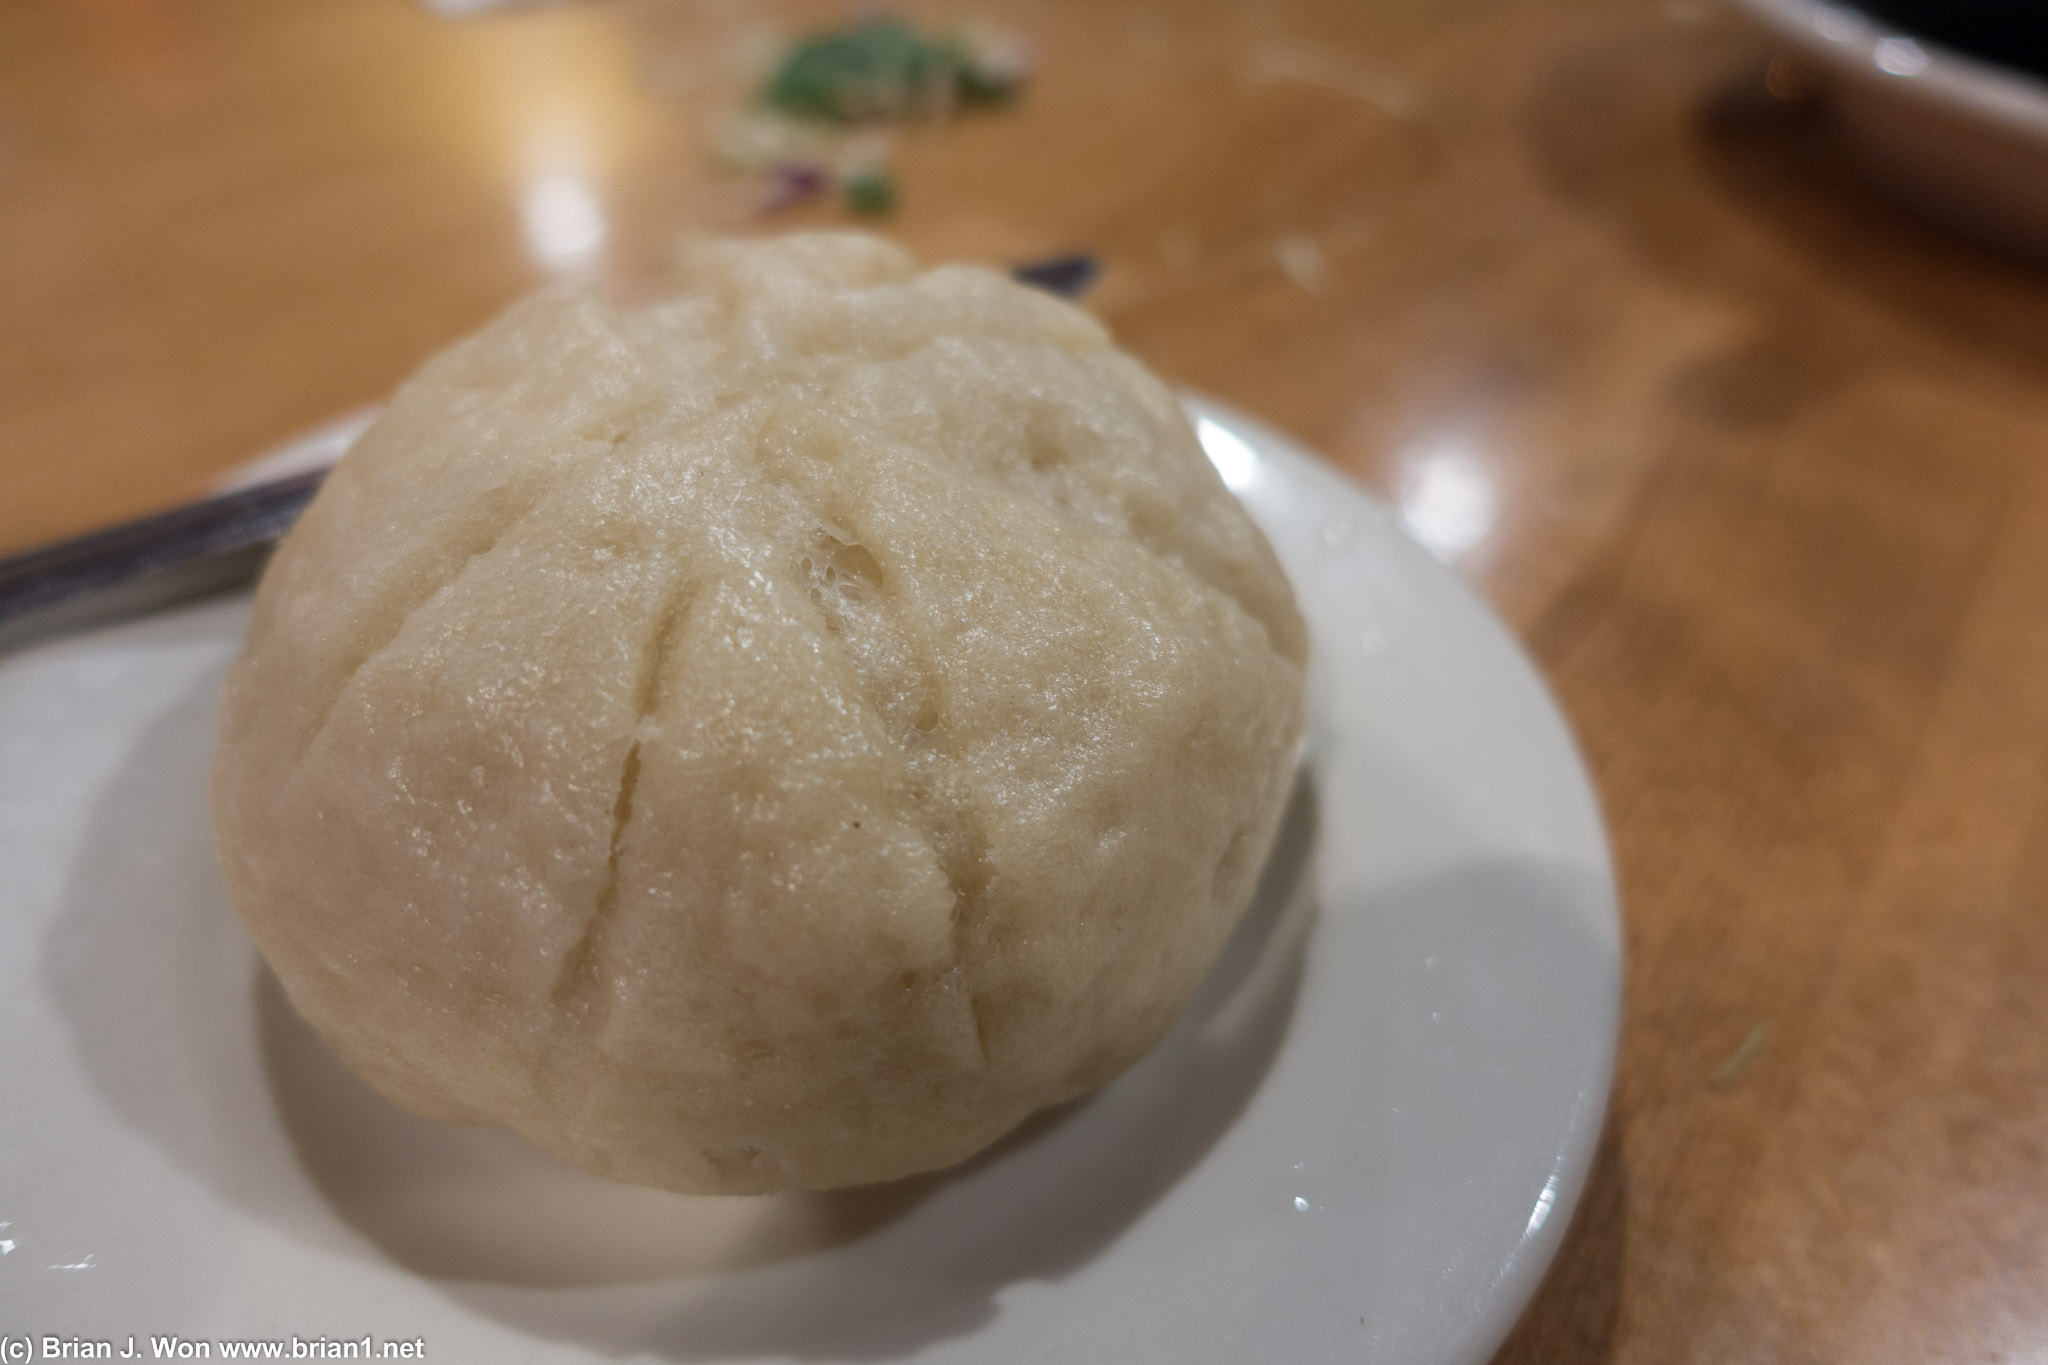 Steamed bun. Veggie and soy filling was indifferent, but the bread was pretty decent!